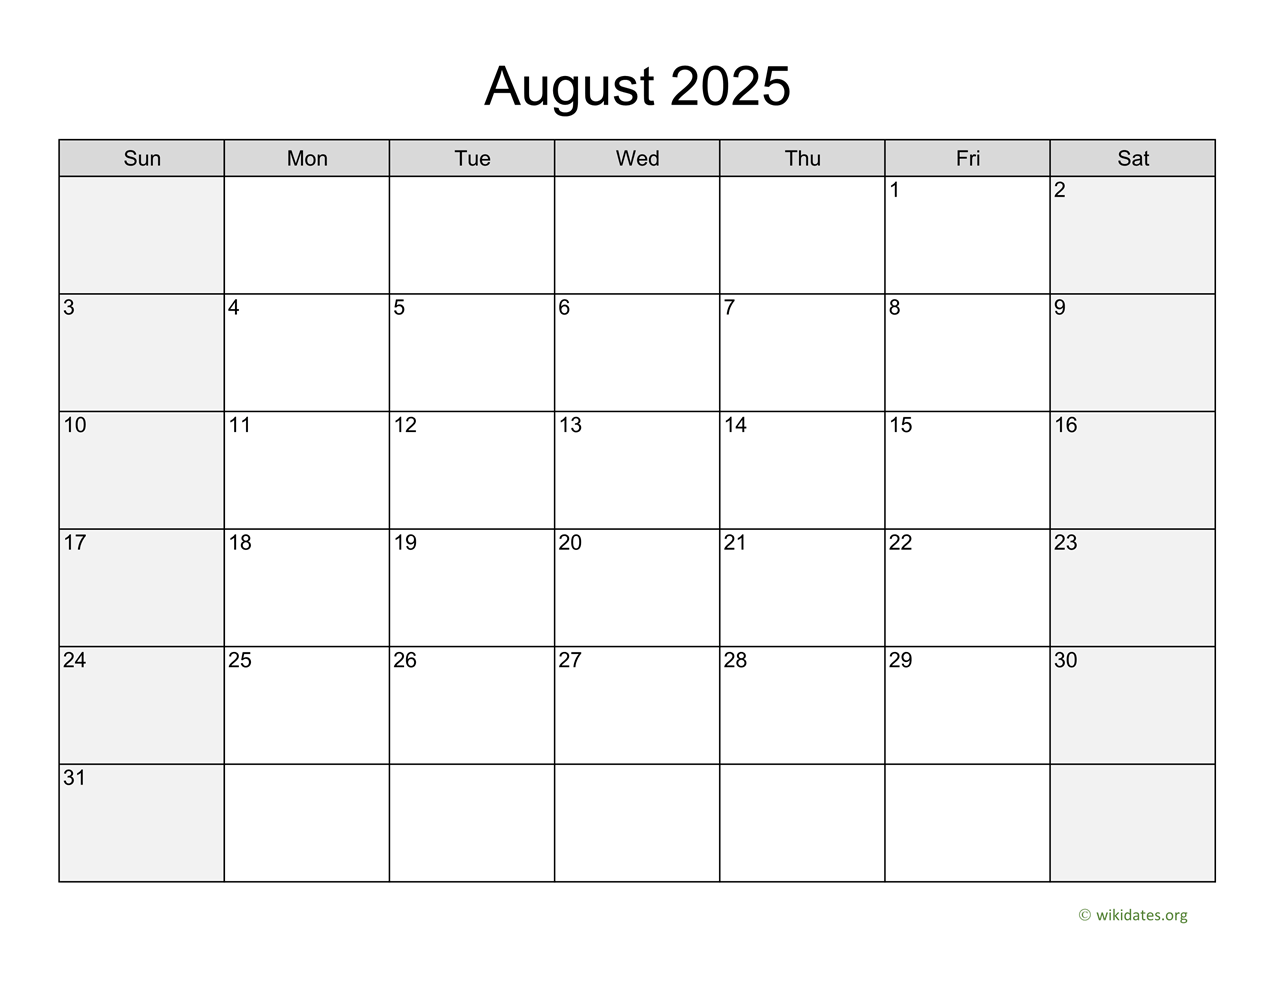  August 2025 Calendar With Weekend Shaded WikiDates